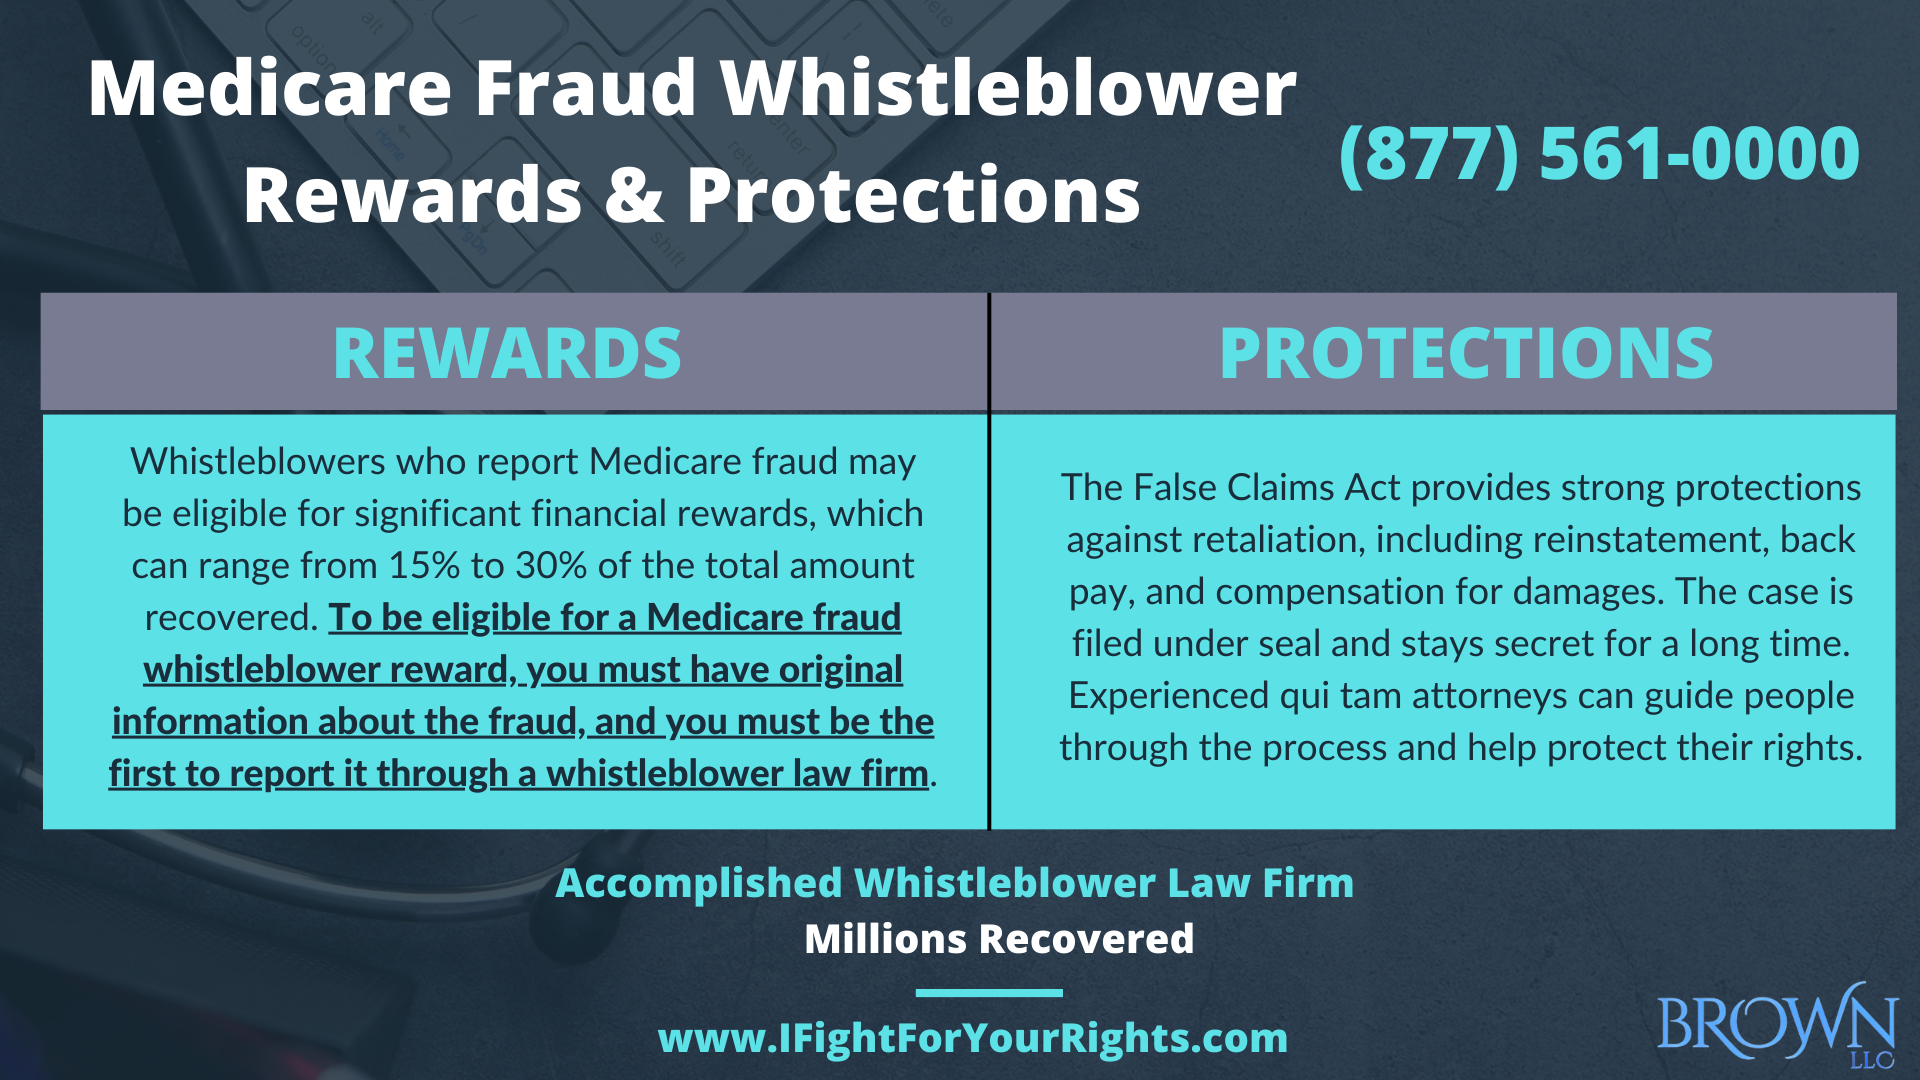 Medicare Fraud Whistleblower Rewards Know Your Rights